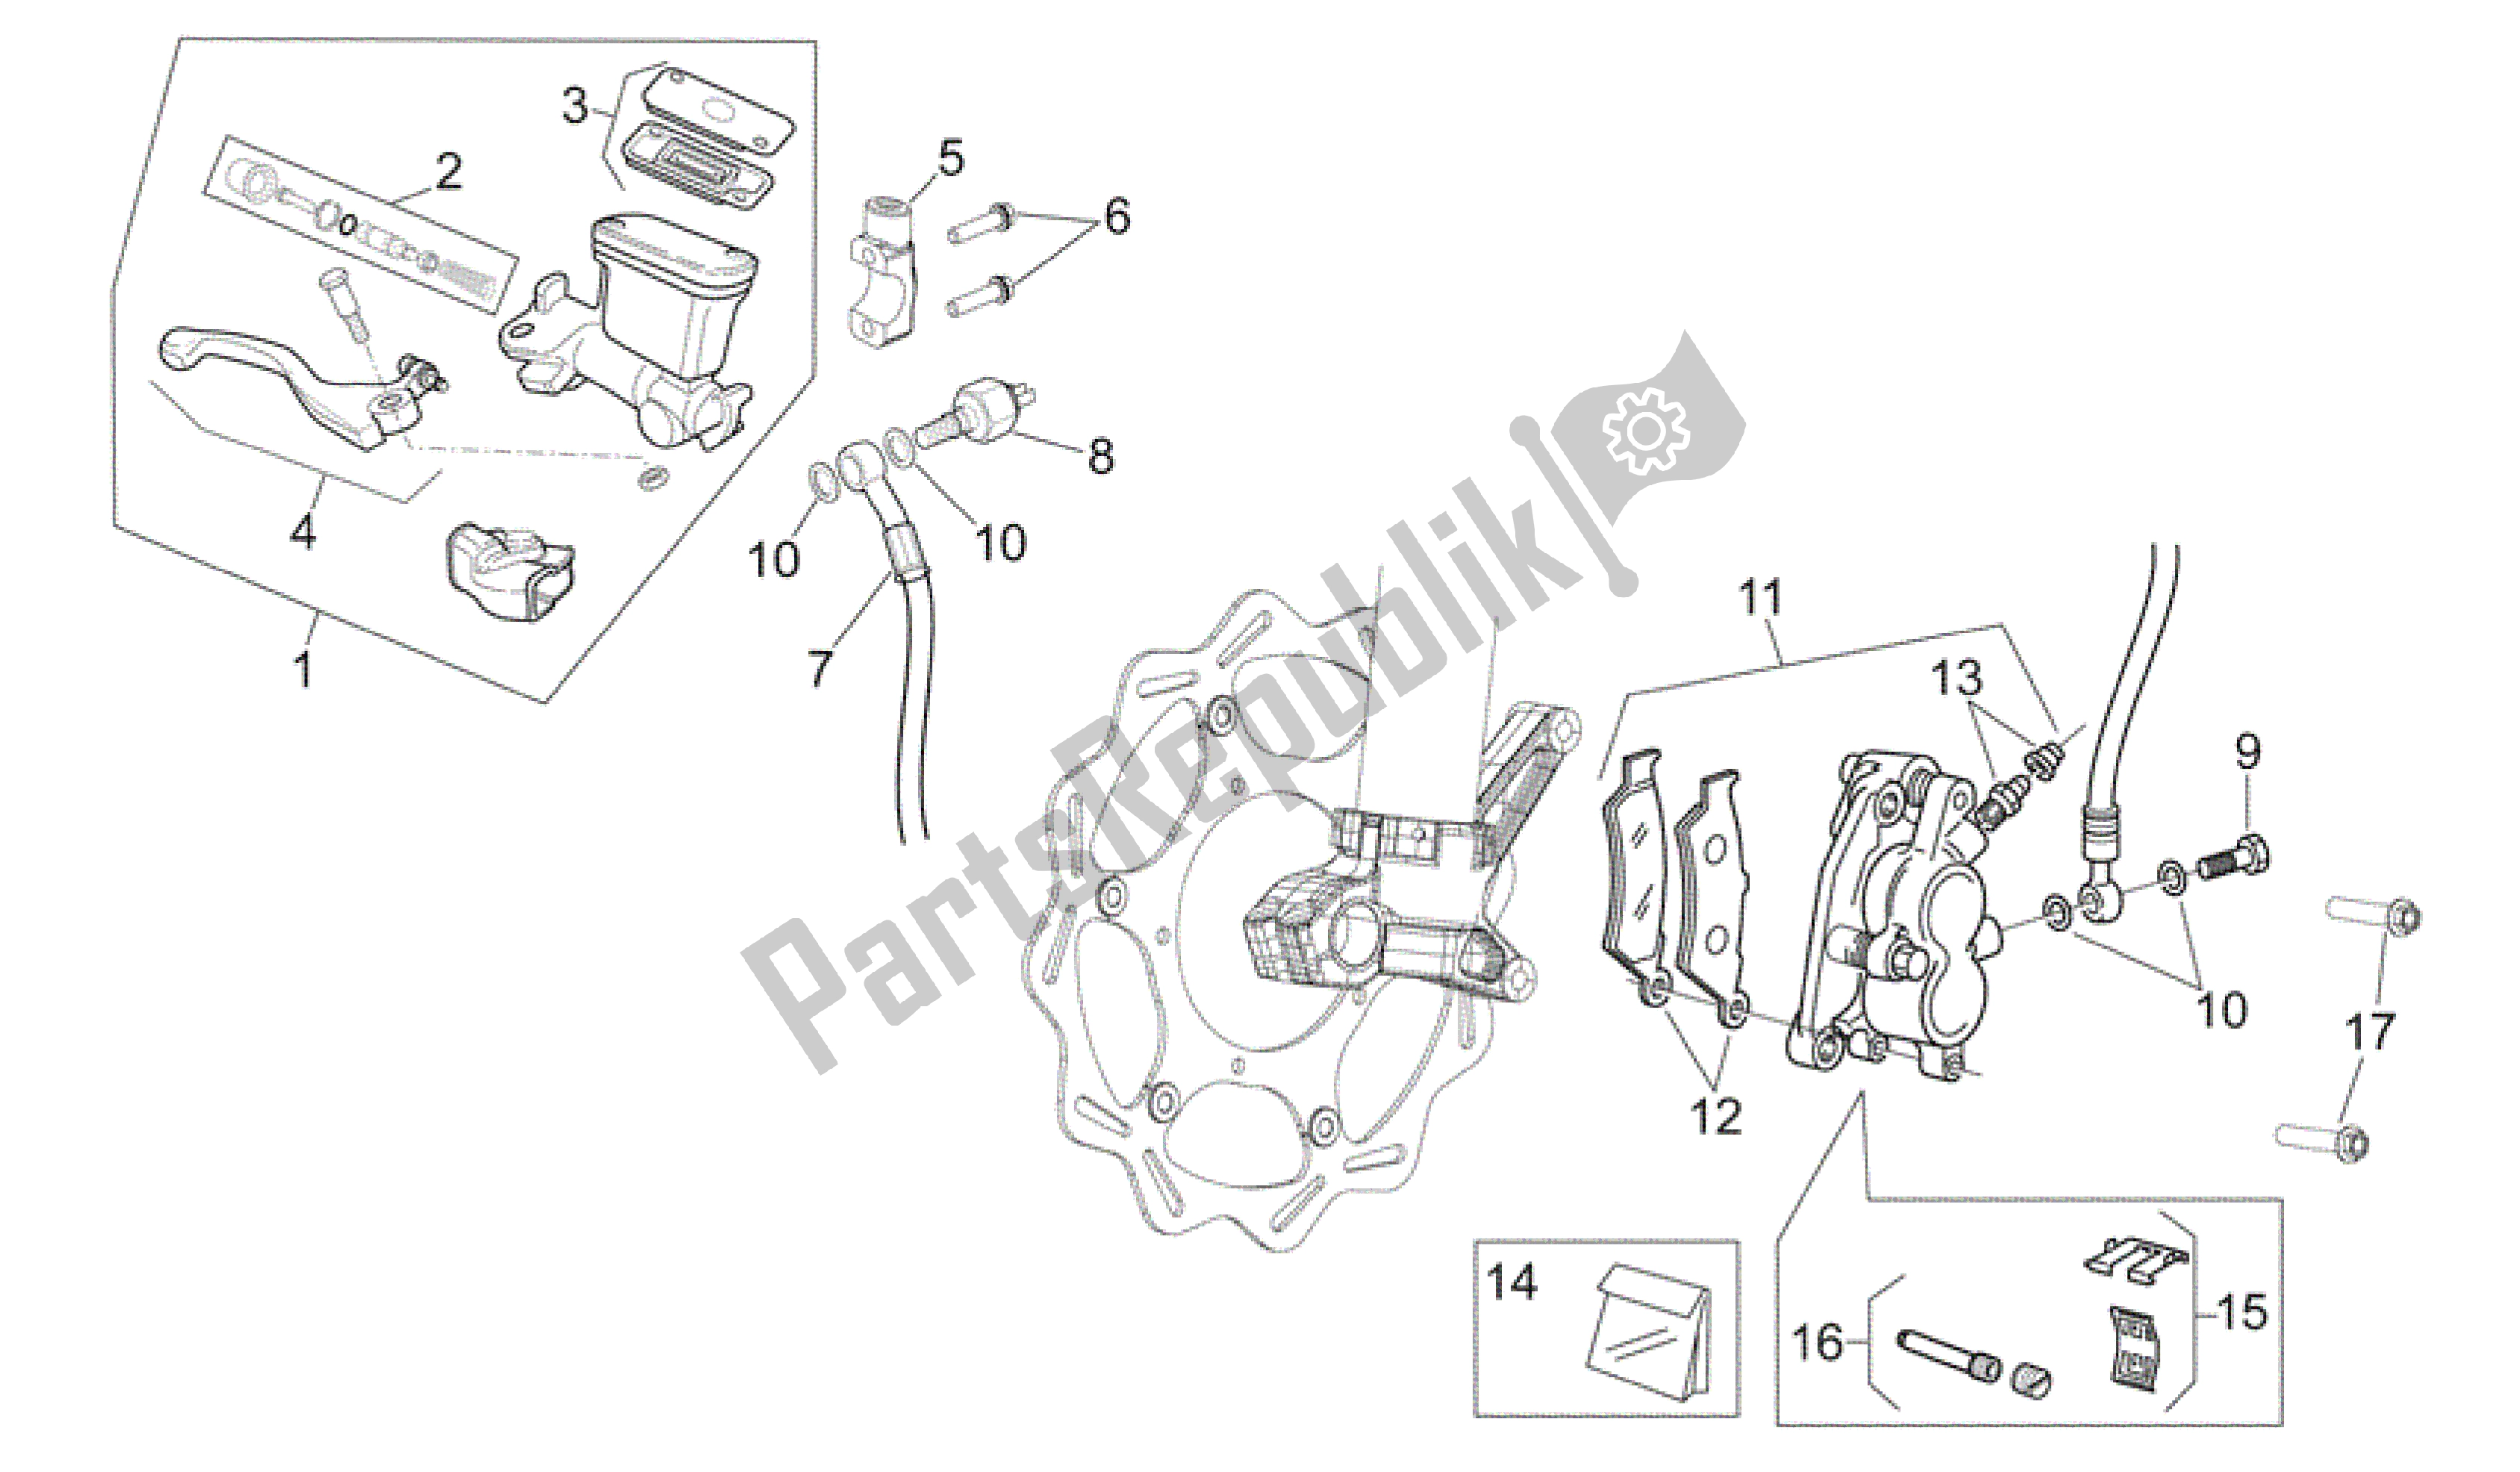 All parts for the Front Brake System I of the Aprilia RXV 550 2009 - 2011